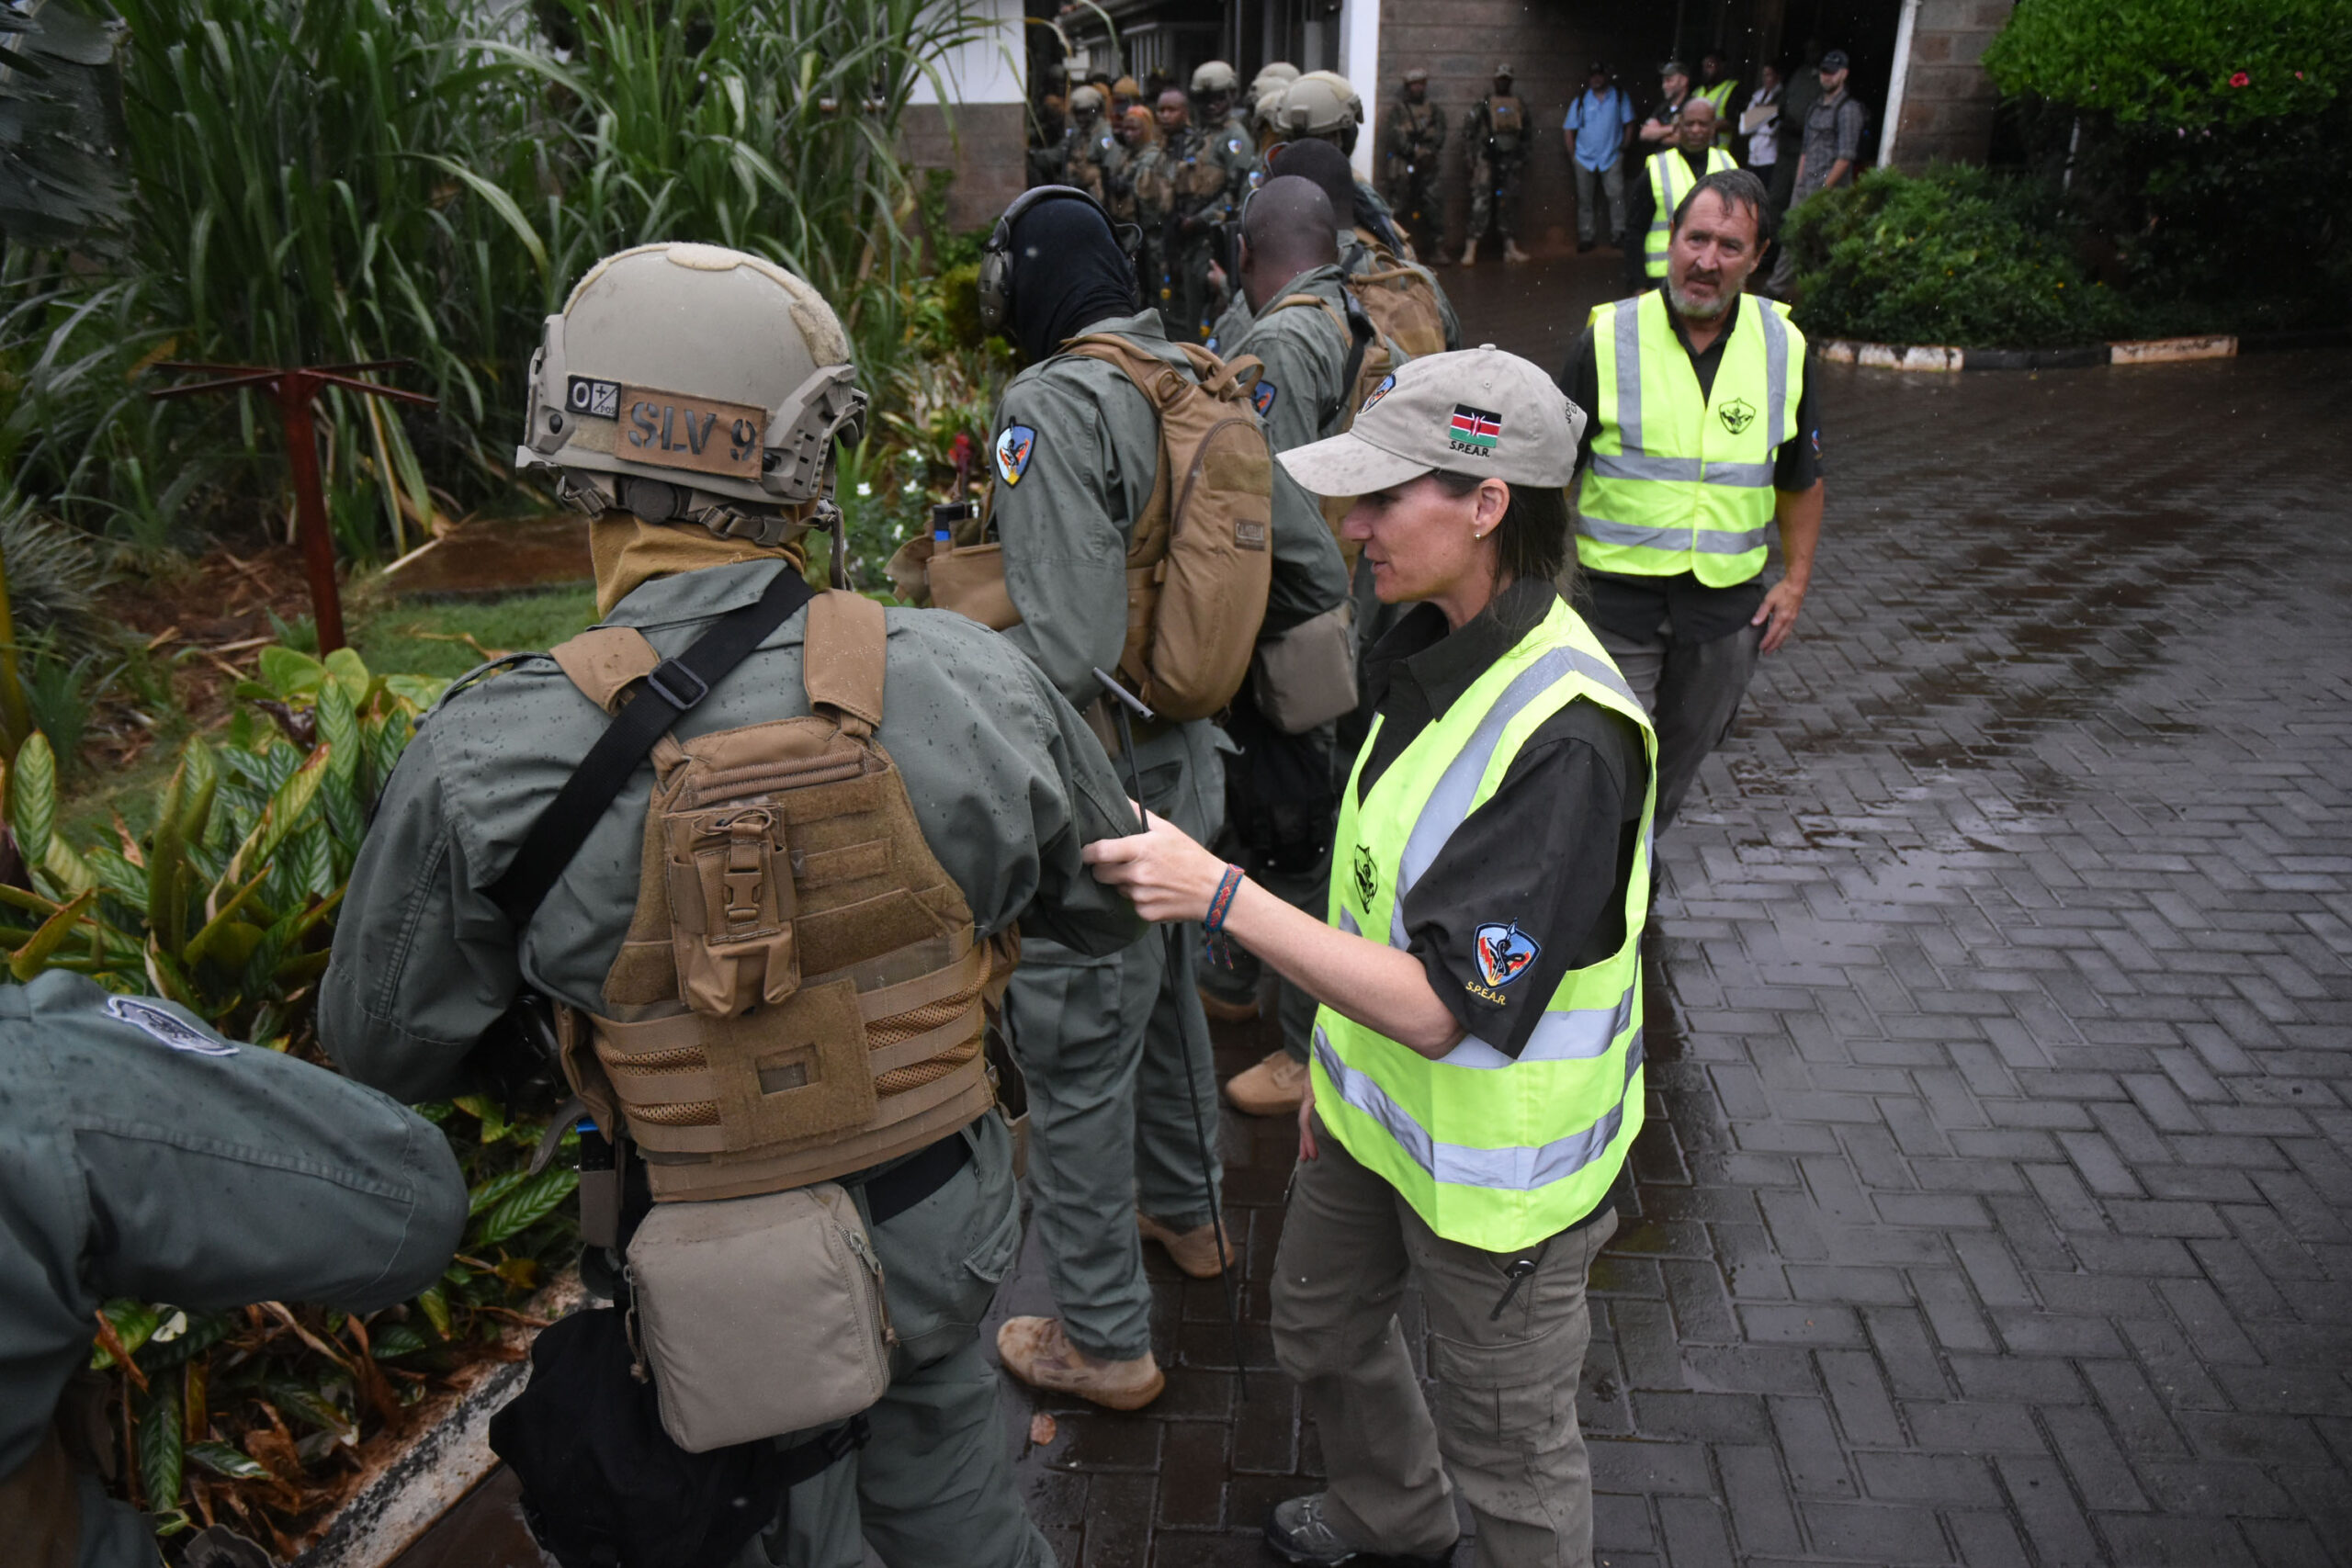 Instructors, acting as safety observers (in yellow vests), from the Department of State Antiterrorism Assistance program (ATA) conduct weapons safety inspections with Kenyan police on October 30, 2021, before the start of a Joint Readiness Exercise to test emergency response during a simulated attack. The Kenyan police are members of the ATA-trained SPEAR (Special Program for Embassy Augmentation Response) team assigned to protect U.S. diplomatic personnel.